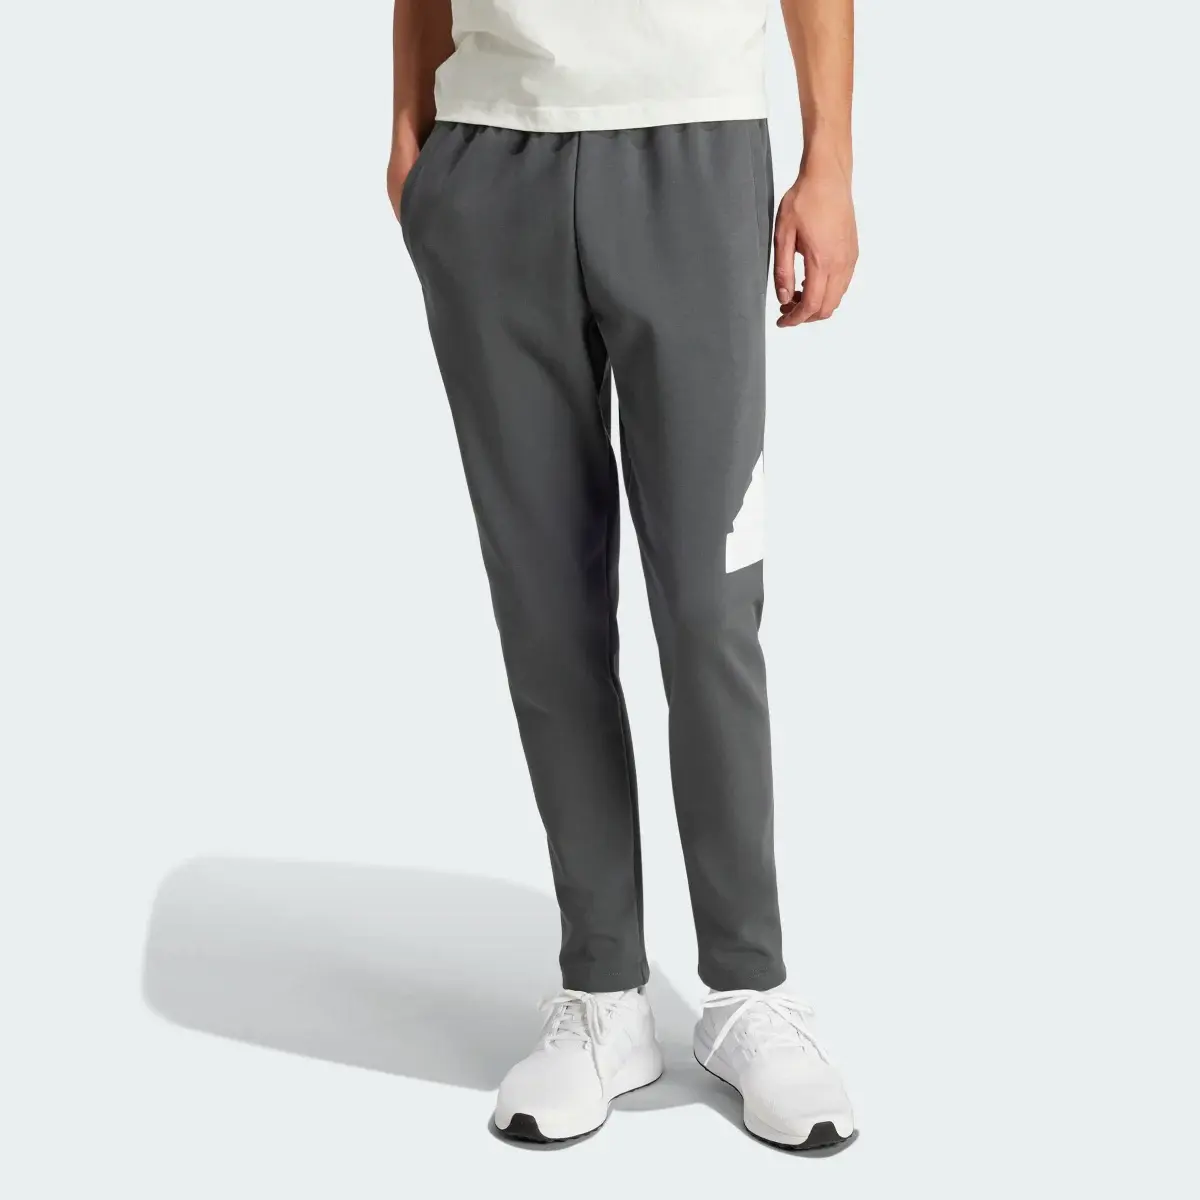 Adidas Future Icons Badge of Sport Joggers. 2